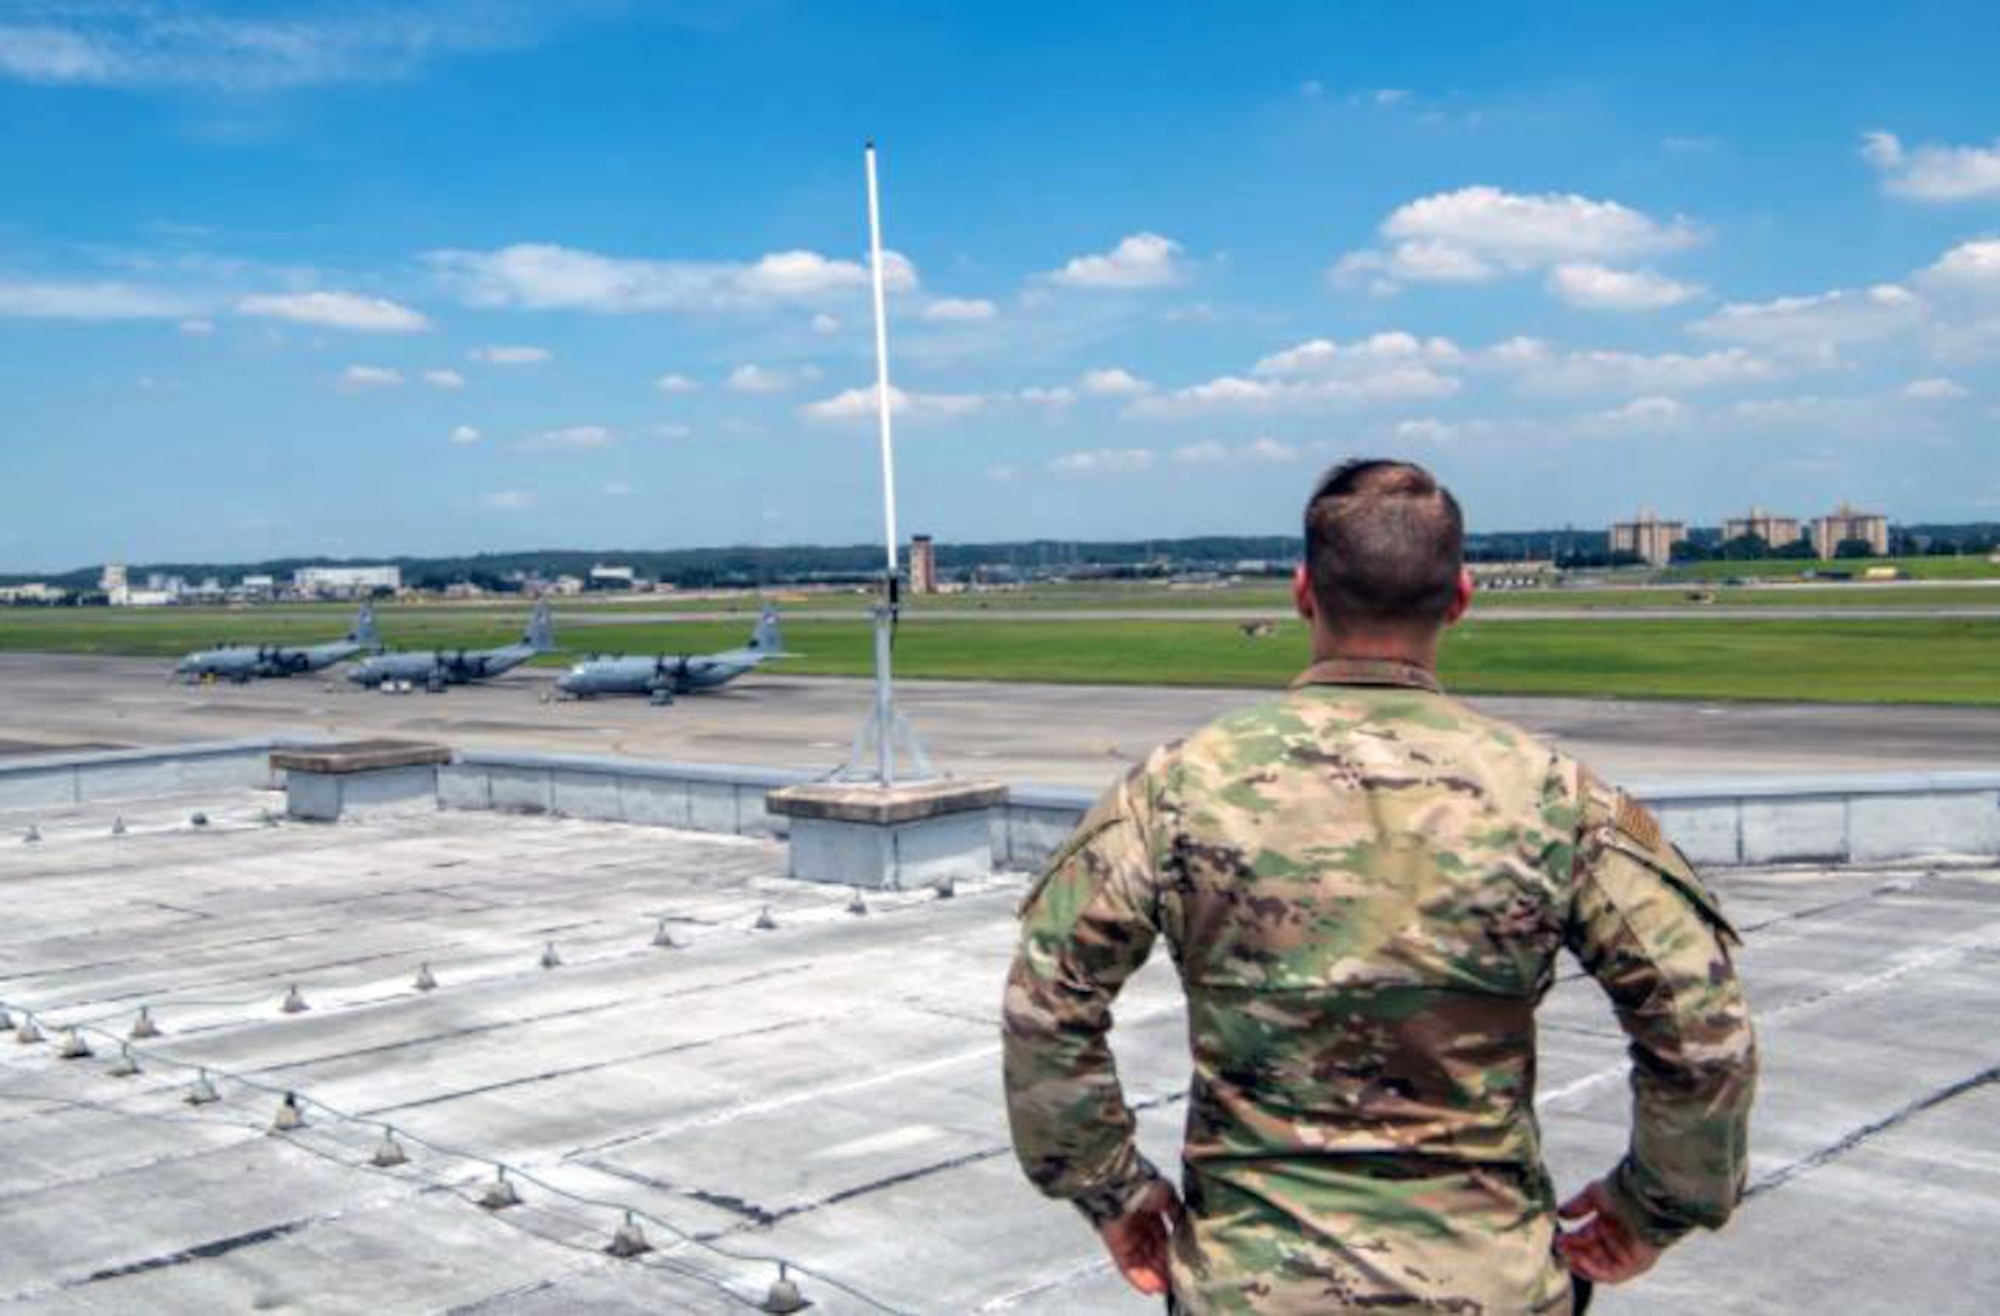 Tech. Sgt. Michael Clevenger, a weather forecaster with the 374th Operations Support Squadron, surveys weather sensors above a flight line at Yokota Air Base, Japan, in August 2021. Weather Systems Branch personnel at Hanscom Air Force Base, Mass. are currently preparing to launch the Air Force Weather - Bridging Environmental Intelligence For Responsive Operational Support Portal, or AFW - BIFROST Portal, which will provide Department of Defense users with a customizable environmental weather intelligence dashboard. (U.S. Air Force photo by Staff Sgt. Brendan Miller)